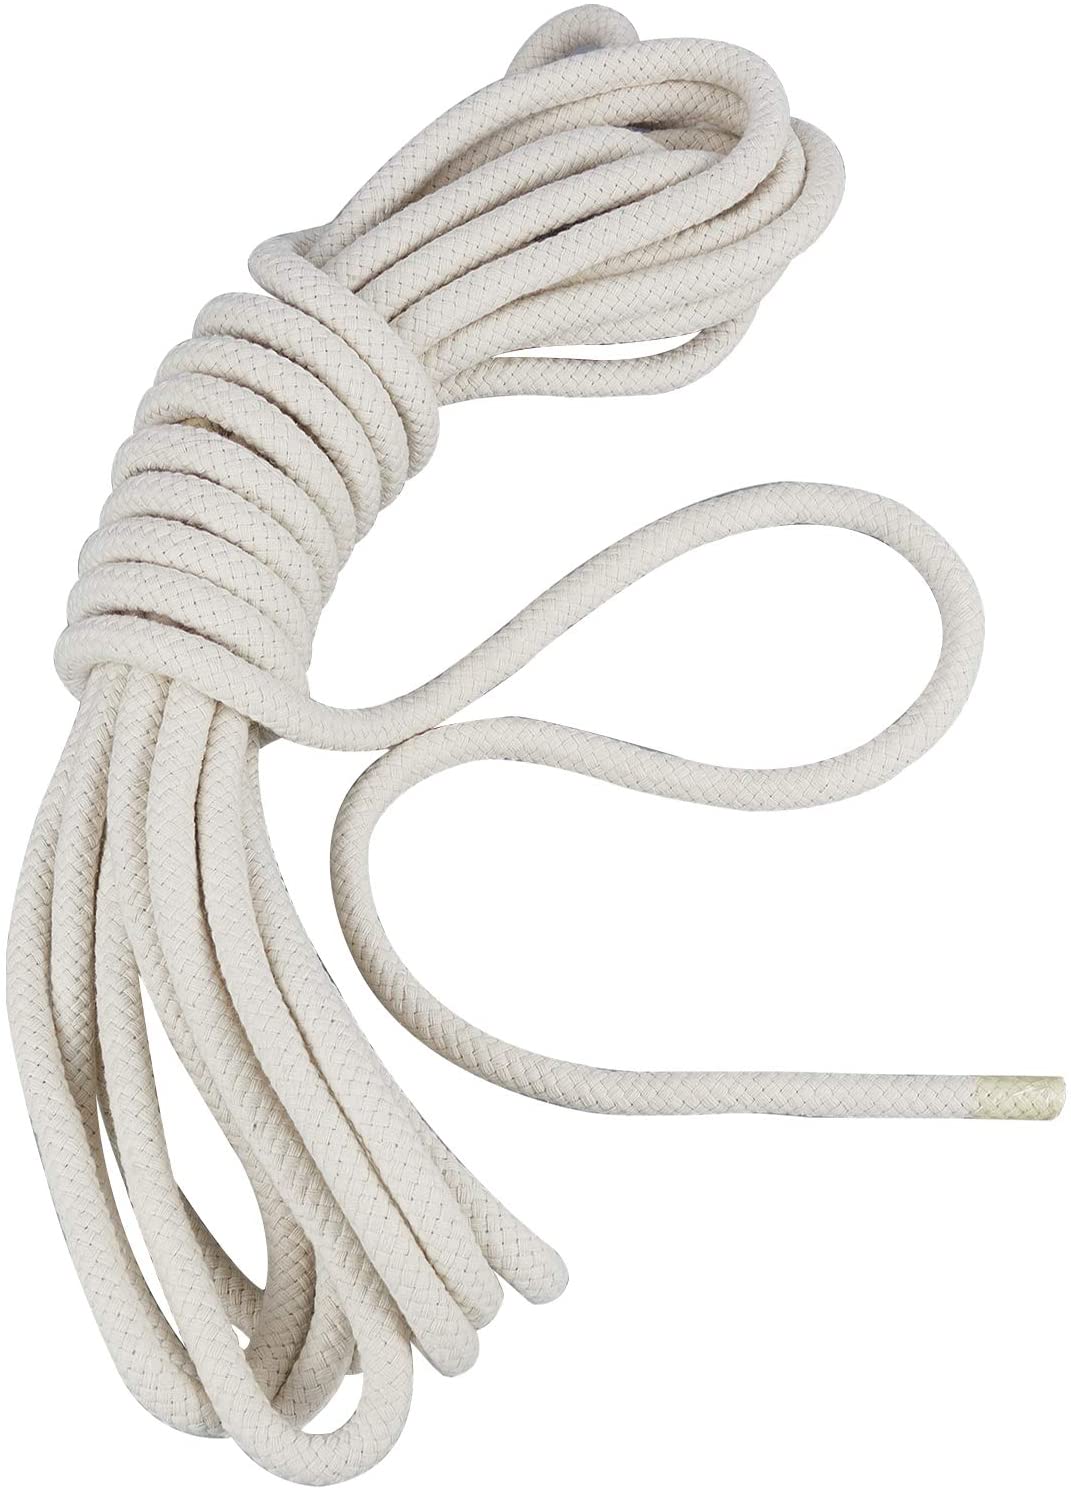 OLYCRAFT 32 Feet Braided Cotton Rope 8mm Cotton Cord Clothesline